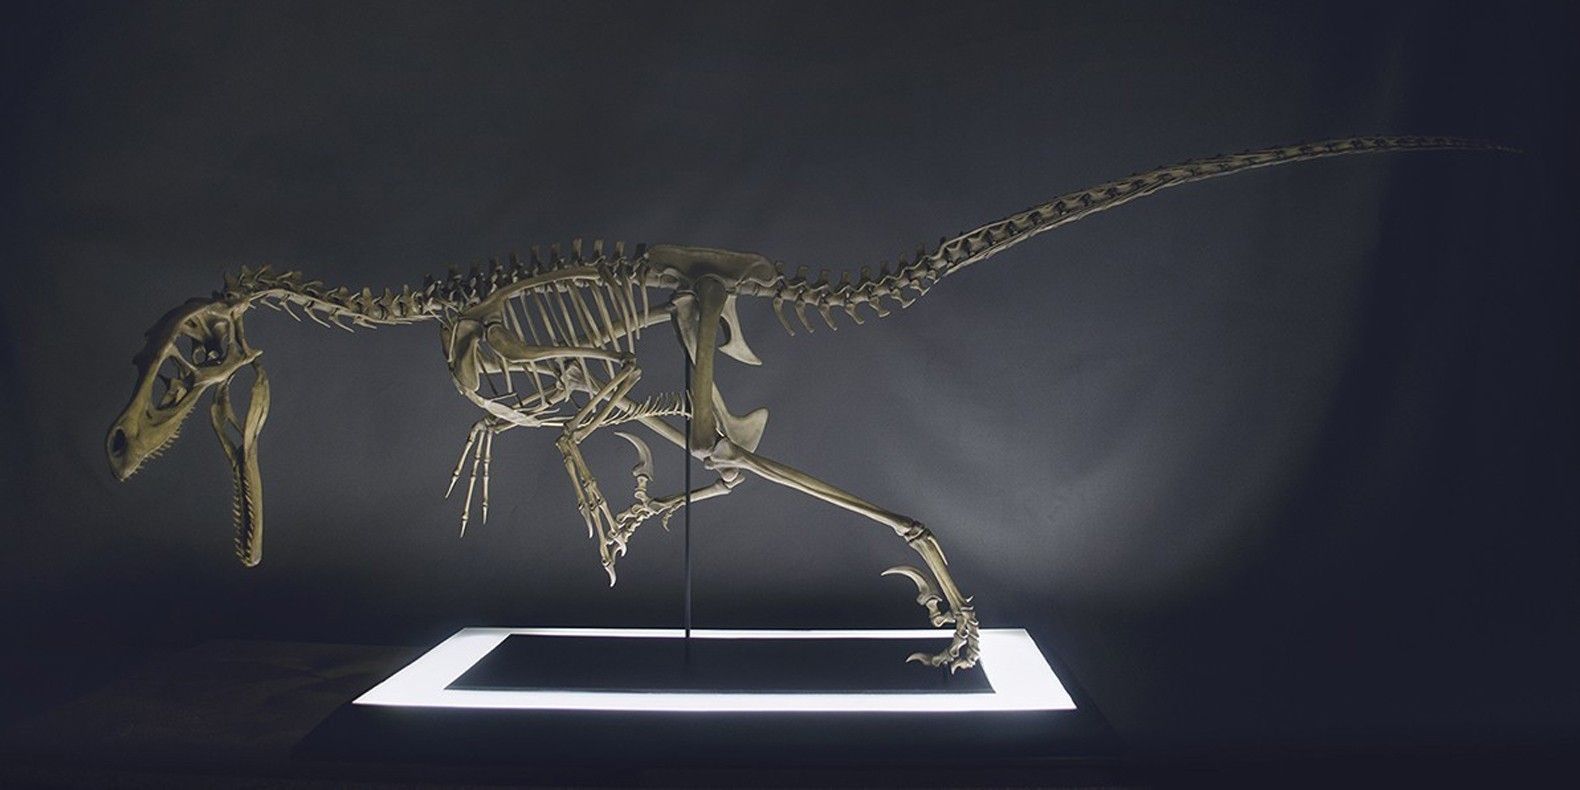 Find here a selection of the best 3D models of 3D printable dinosaurs